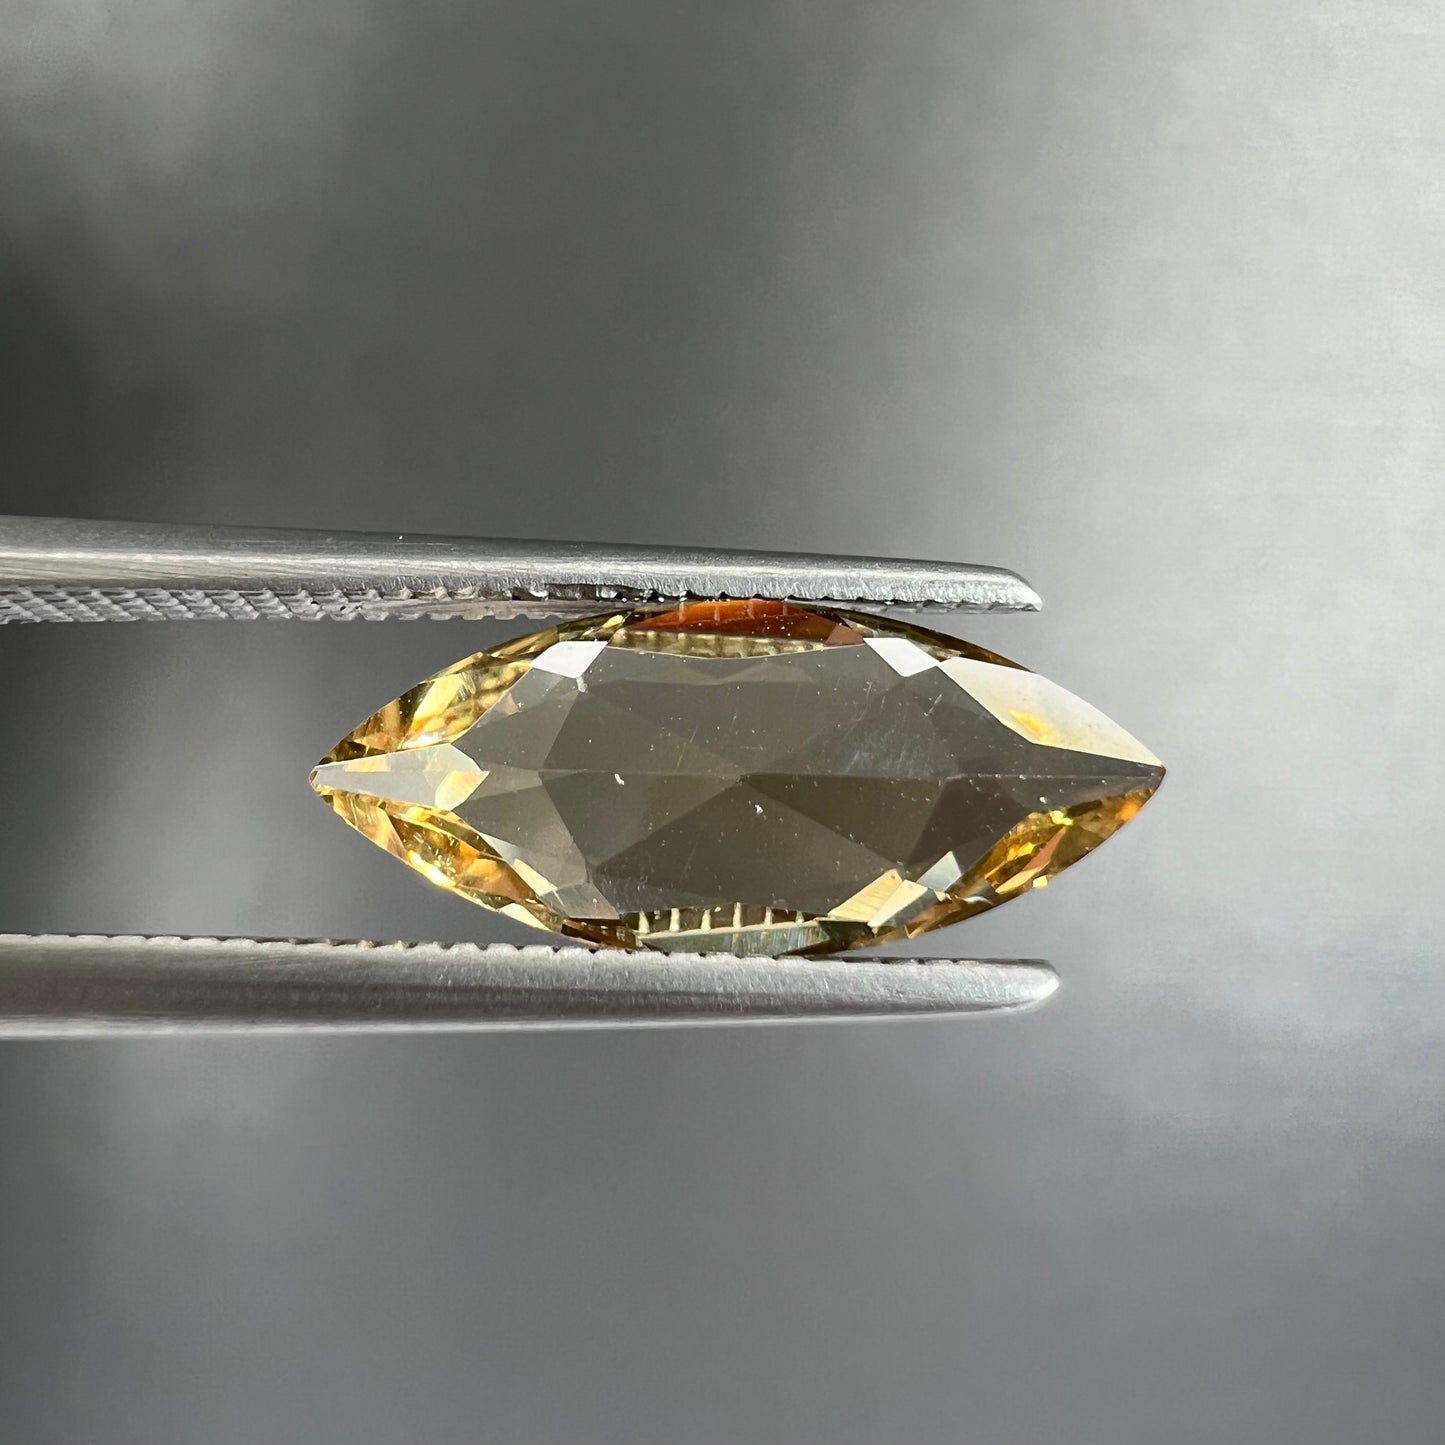 A loose, marquise cut golden beryl gemstone.  The stone is a light yellow color.